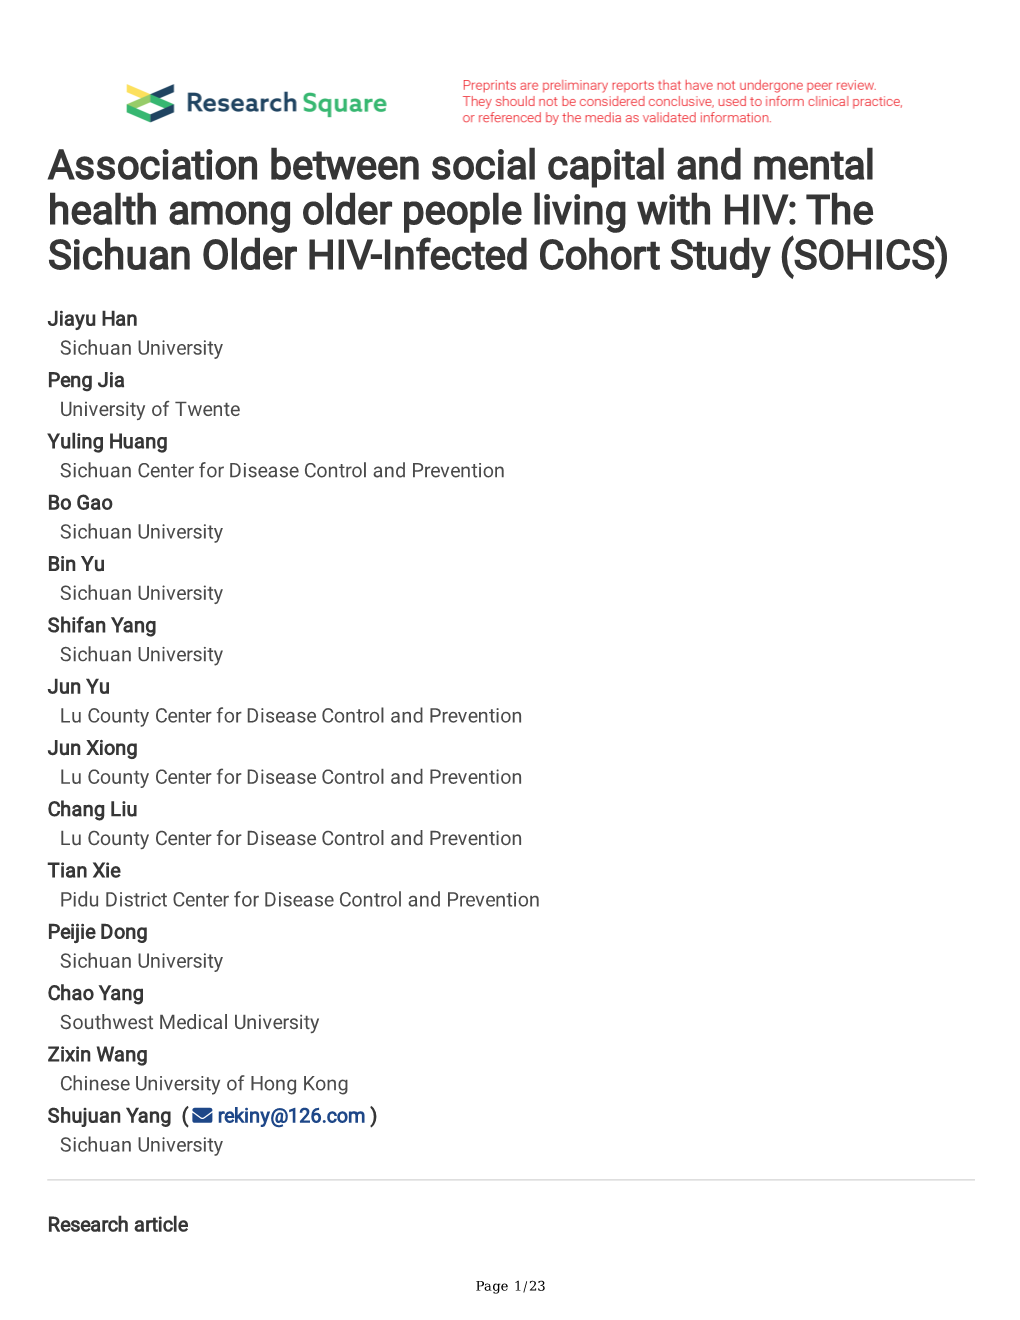 Association Between Social Capital and Mental Health Among Older People Living with HIV: the Sichuan Older HIV-Infected Cohort Study (SOHICS)